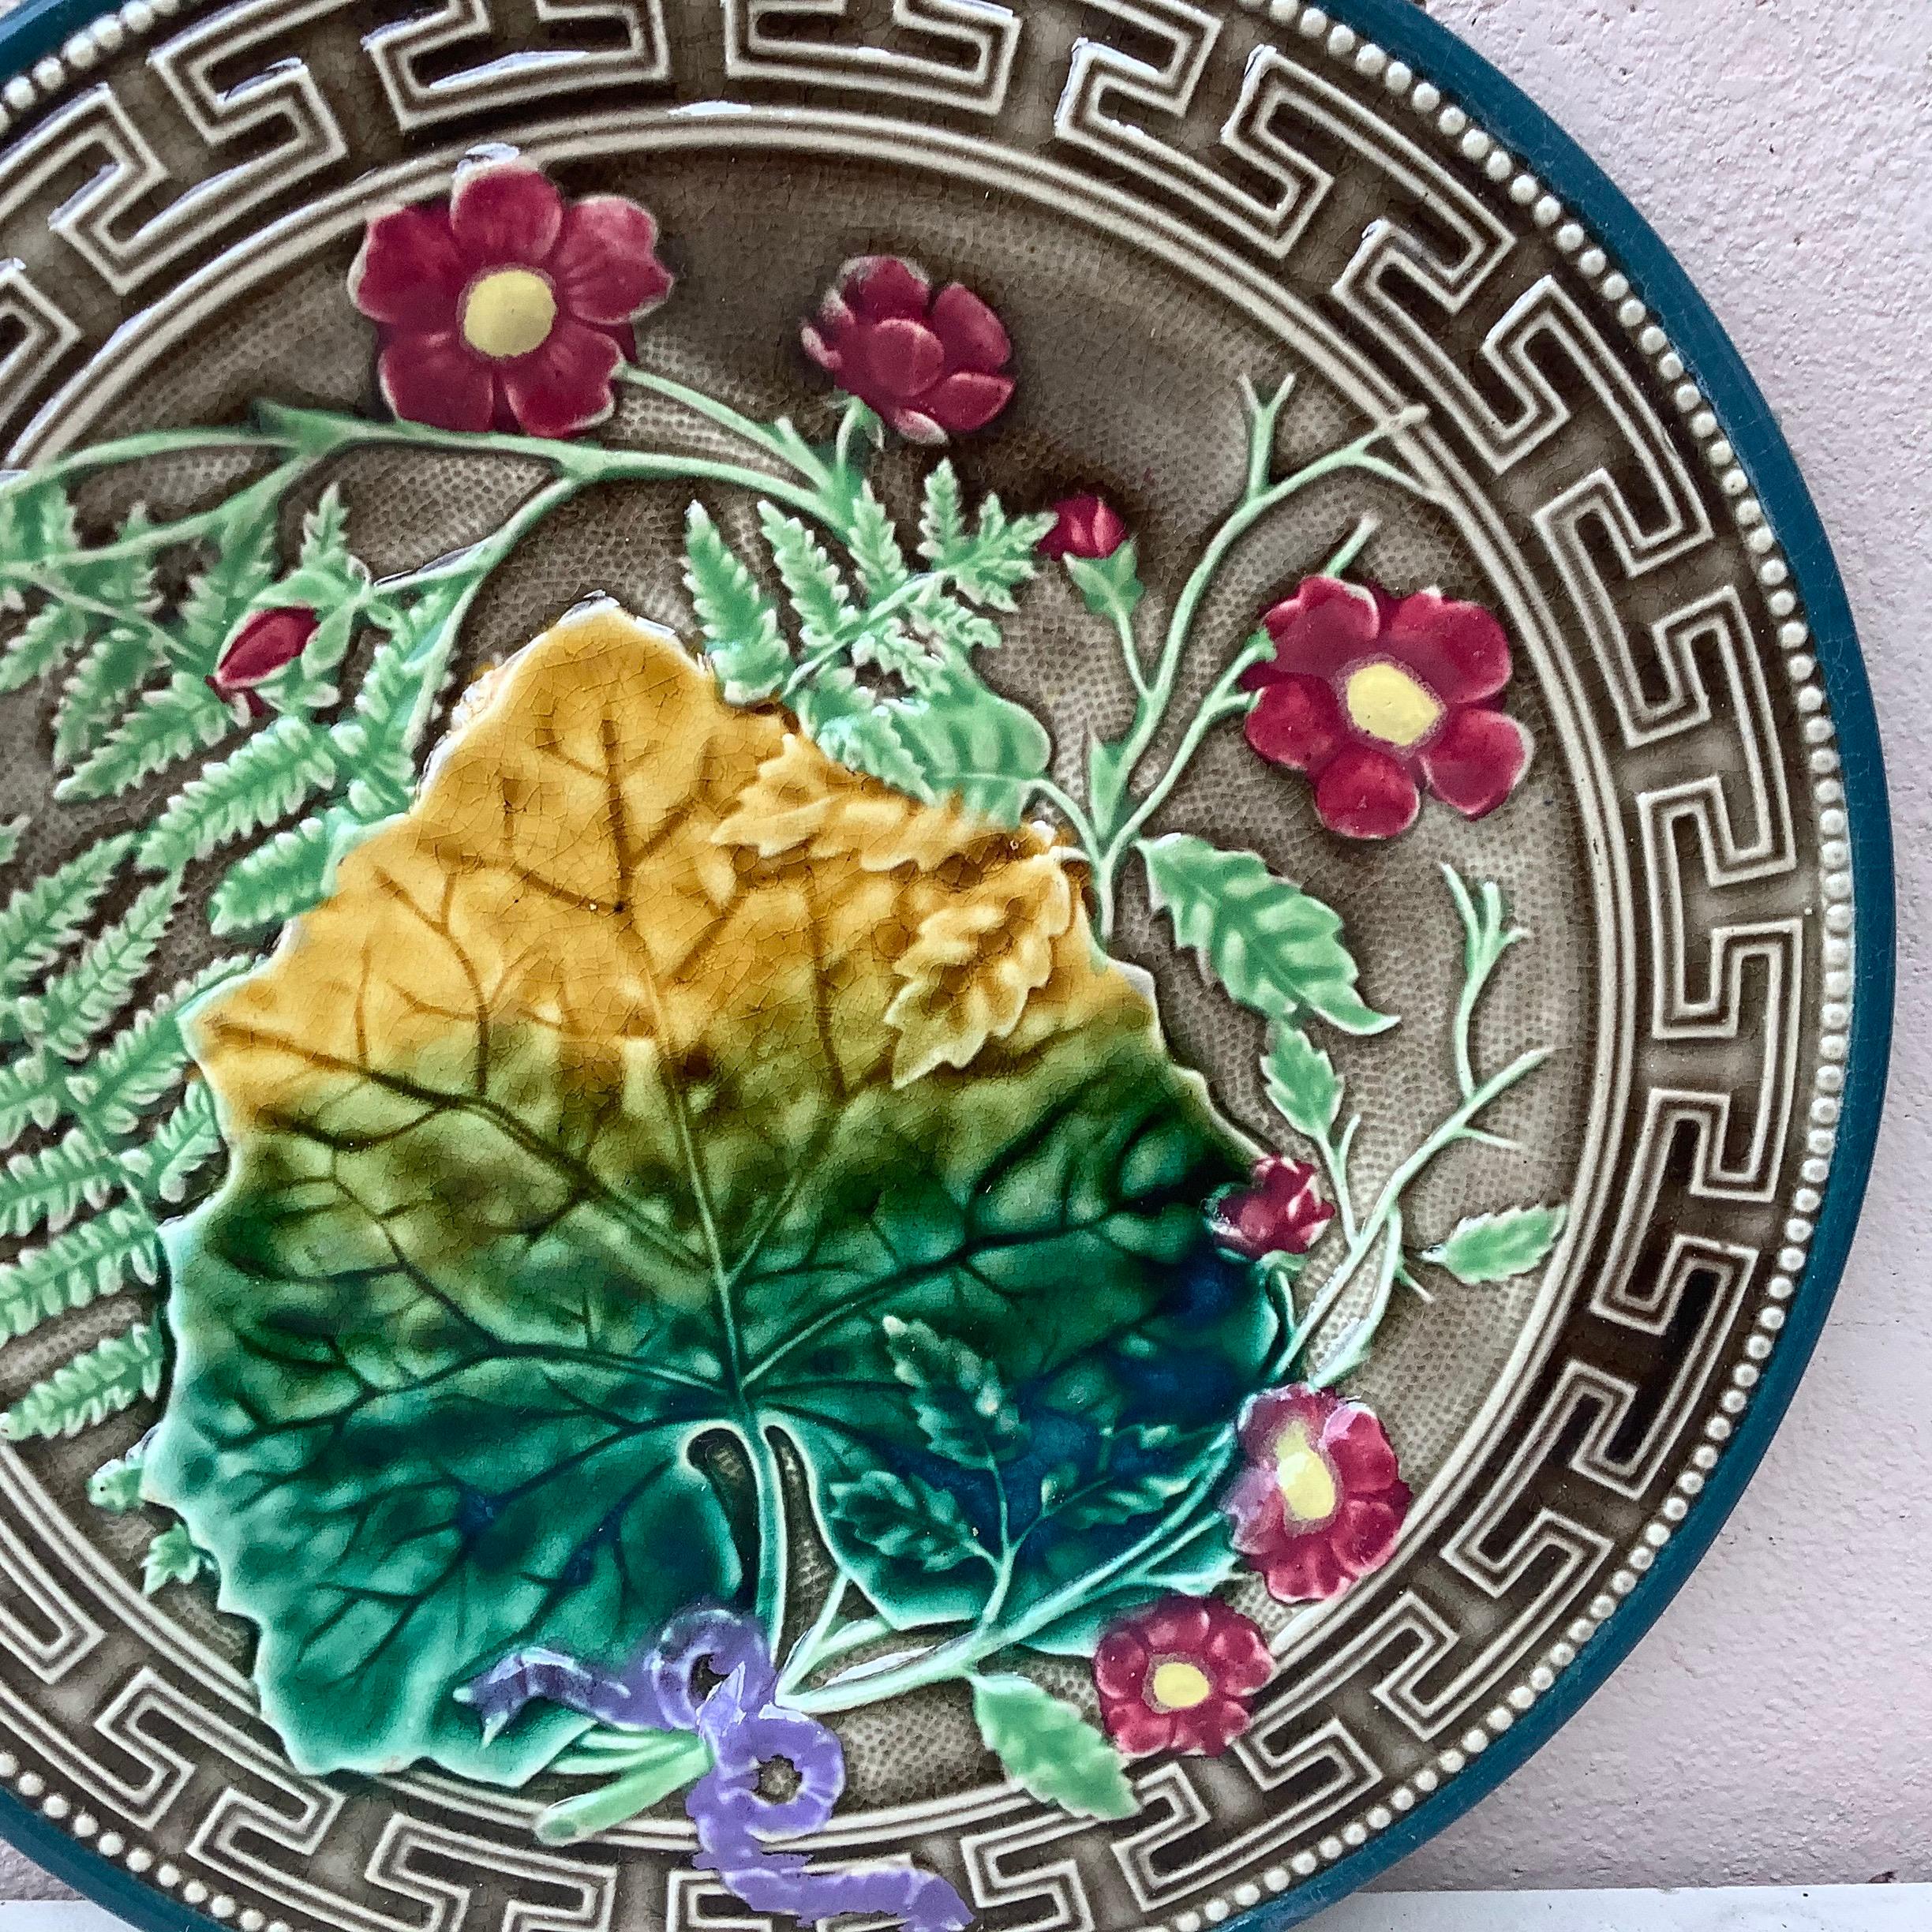 Stunning colors for this Majolica plates signed Choisy le roi, circa 1890.
Decorated with leaves, ferns, pink flowers and Greek border.